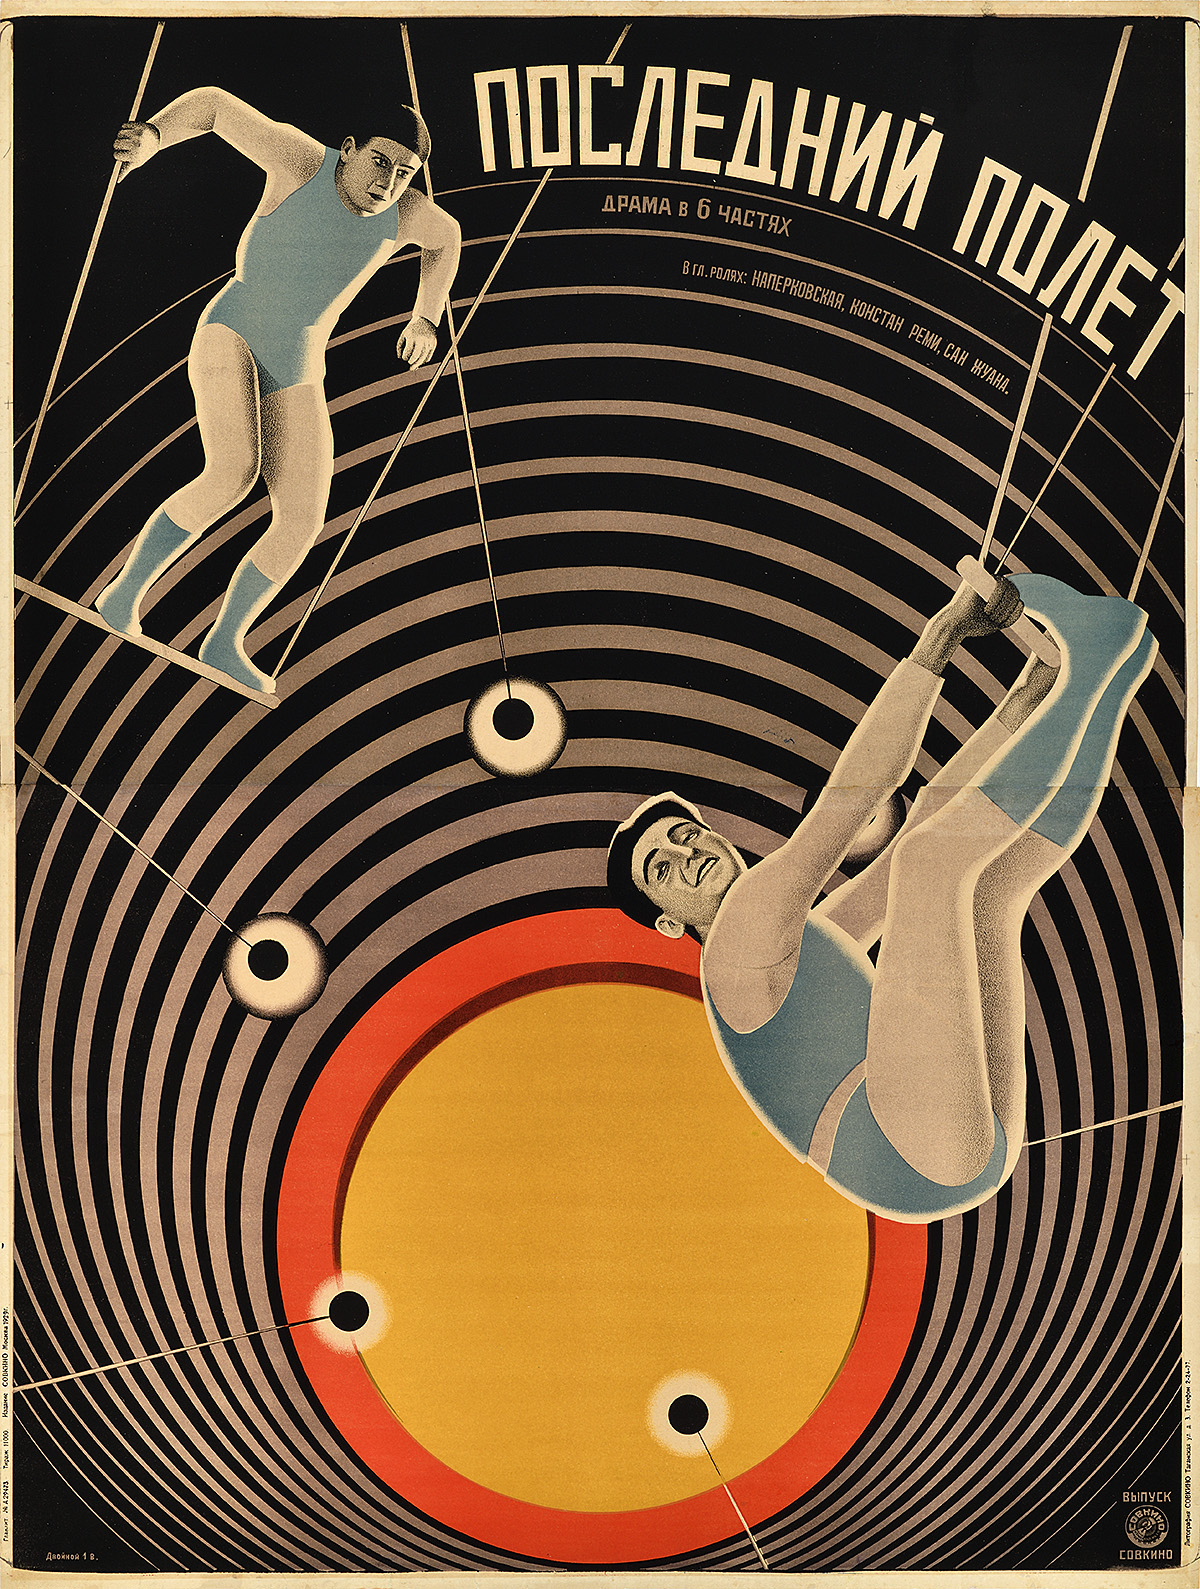 Photomontage poster of two trapeze circus performers doing tricks. A yellow circle surrounded by red and grey rings behind the performers demonstrate a theater.